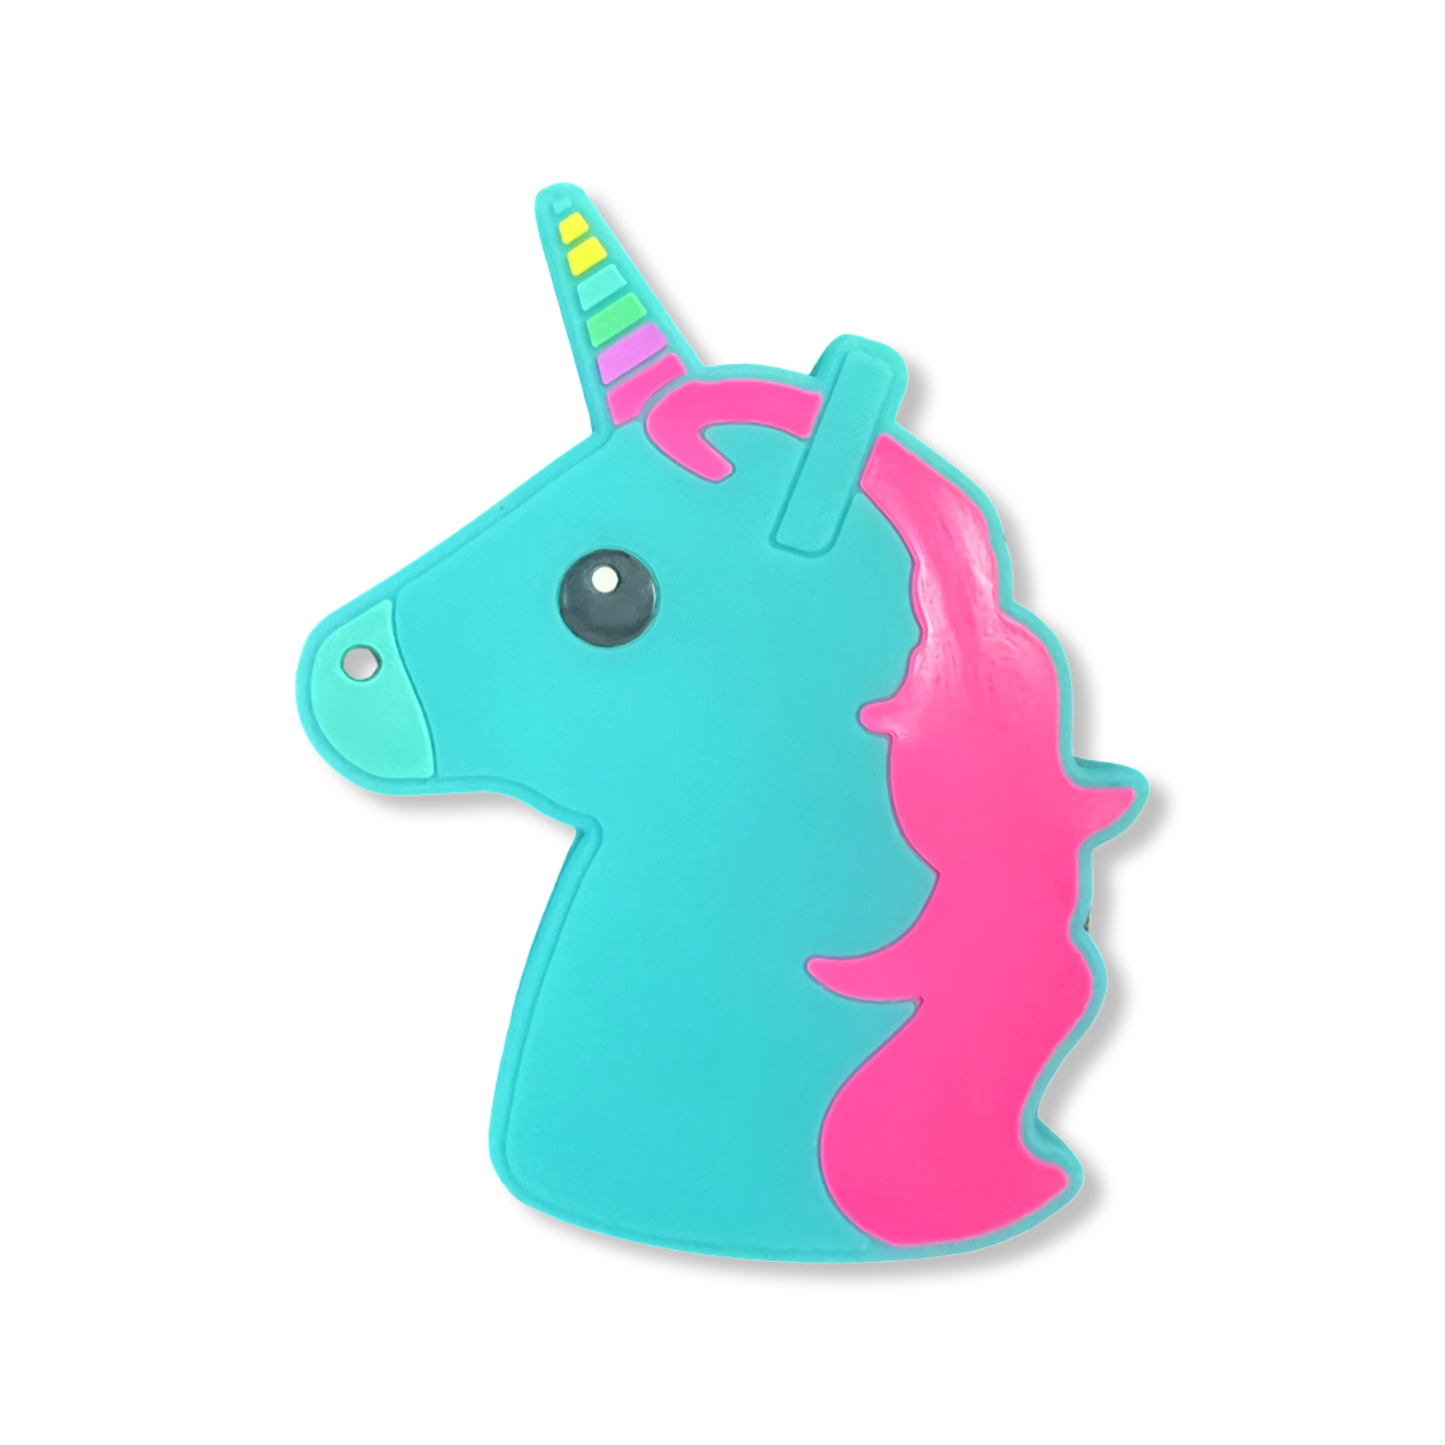 Cute Unicorn Power Bank Charger